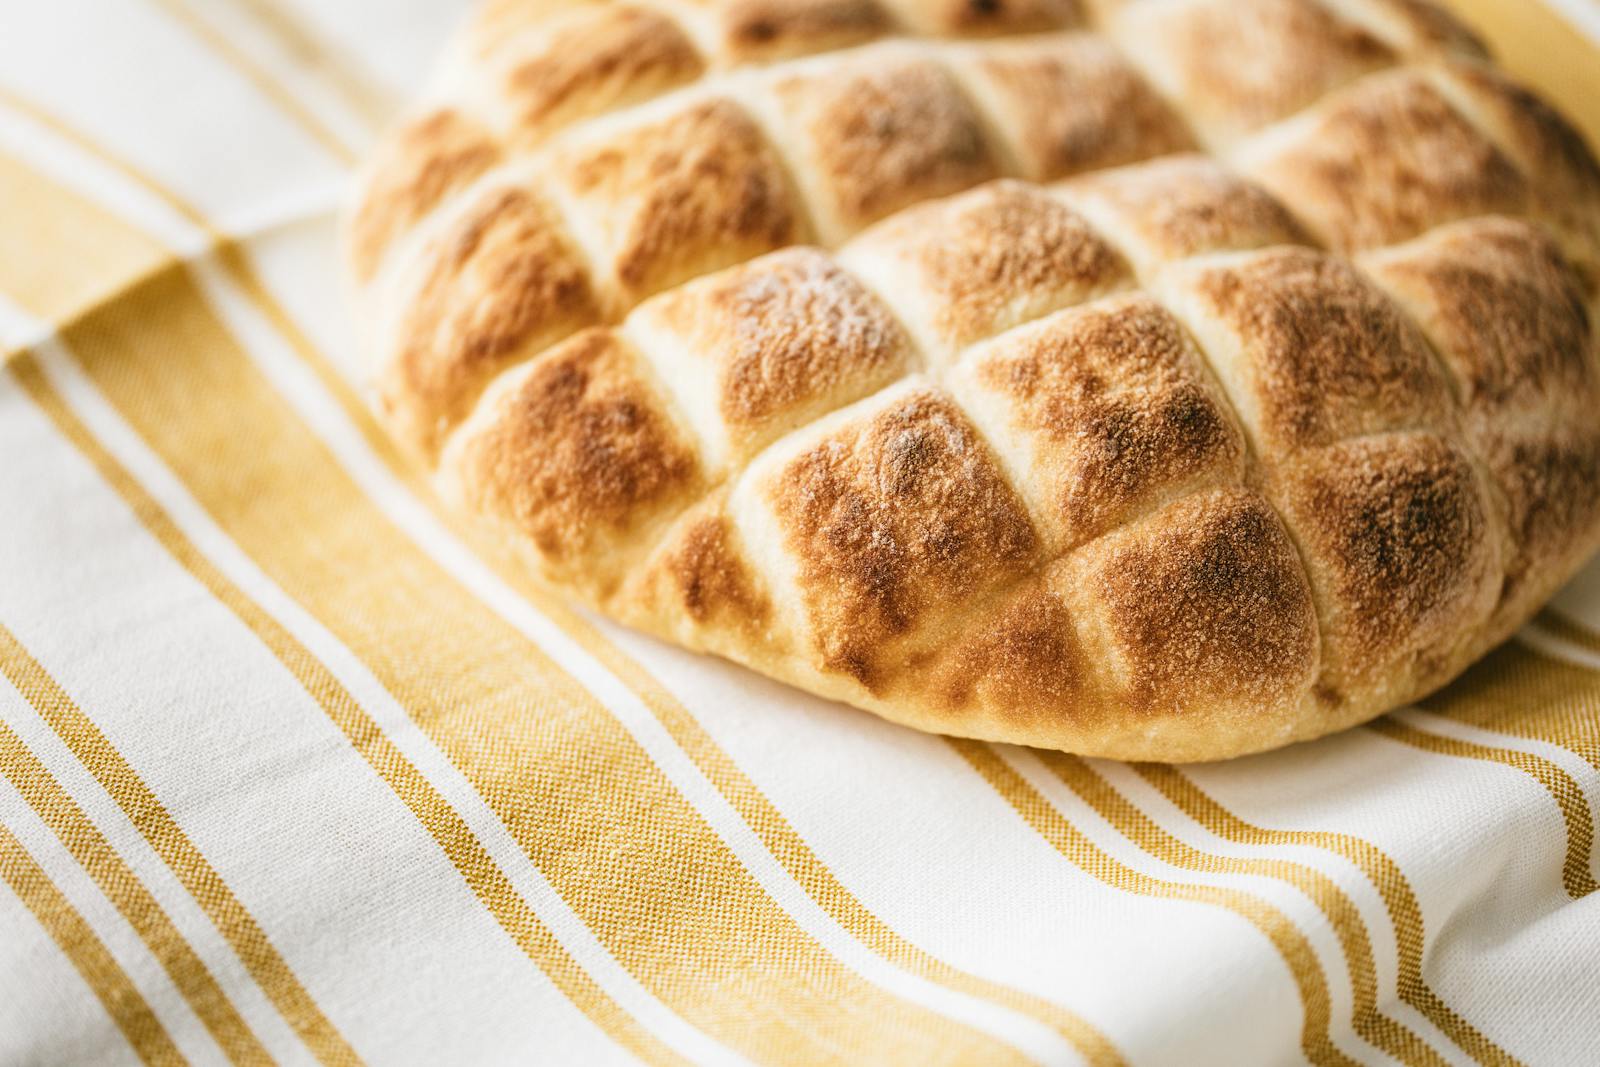 Fresh baked bread on striped tablecloth